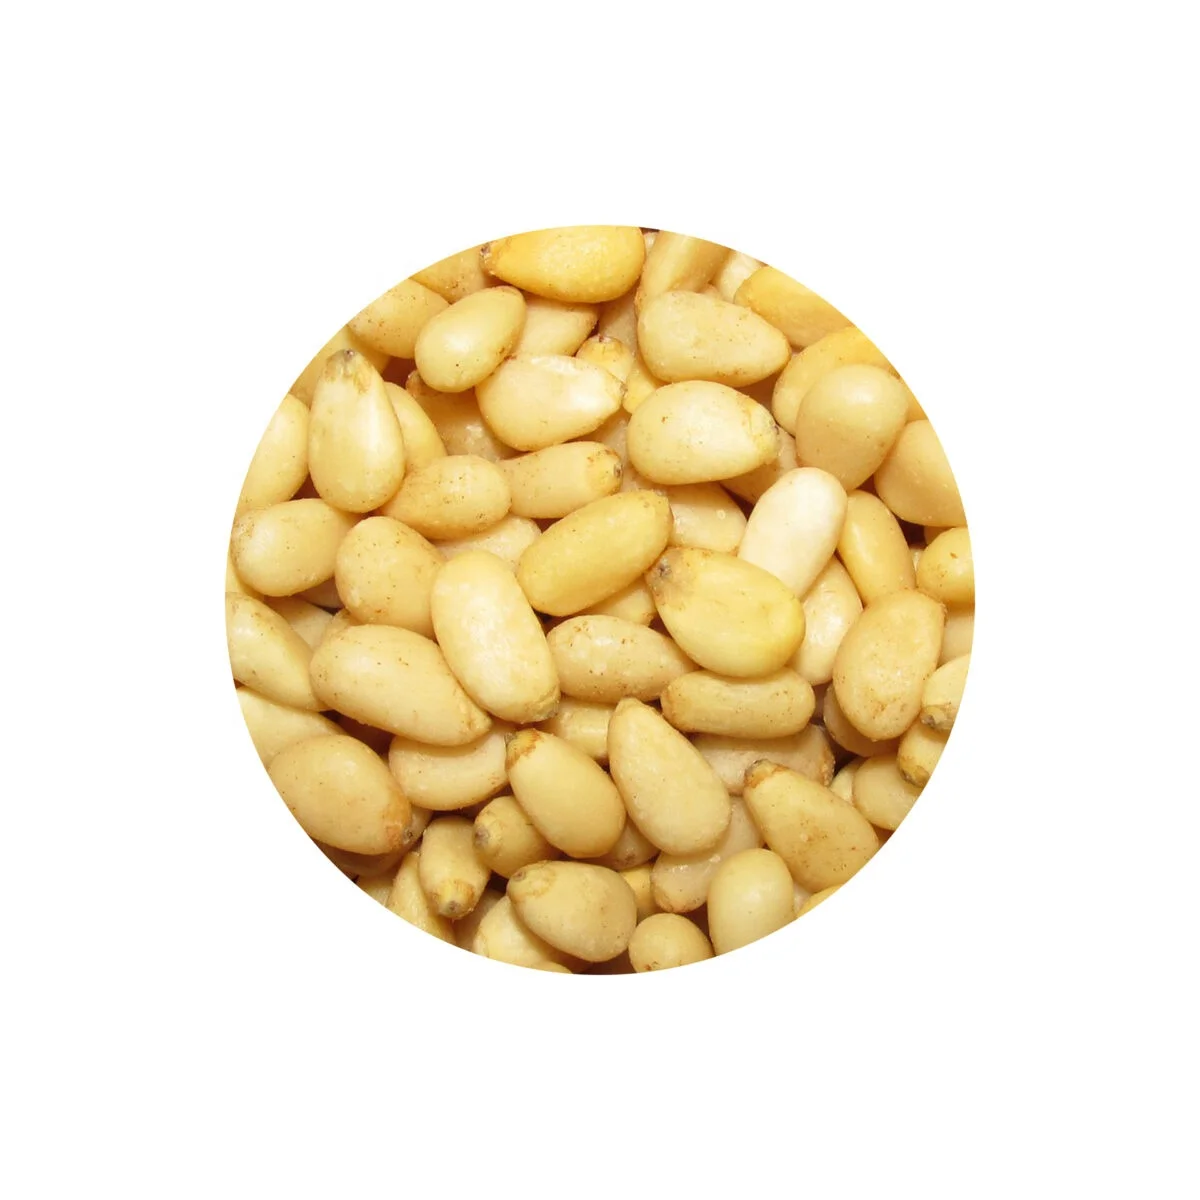 Organic Pine Nuts Cheap Price Roasted Dried Nut Snacks Open Pine Nut in Shell